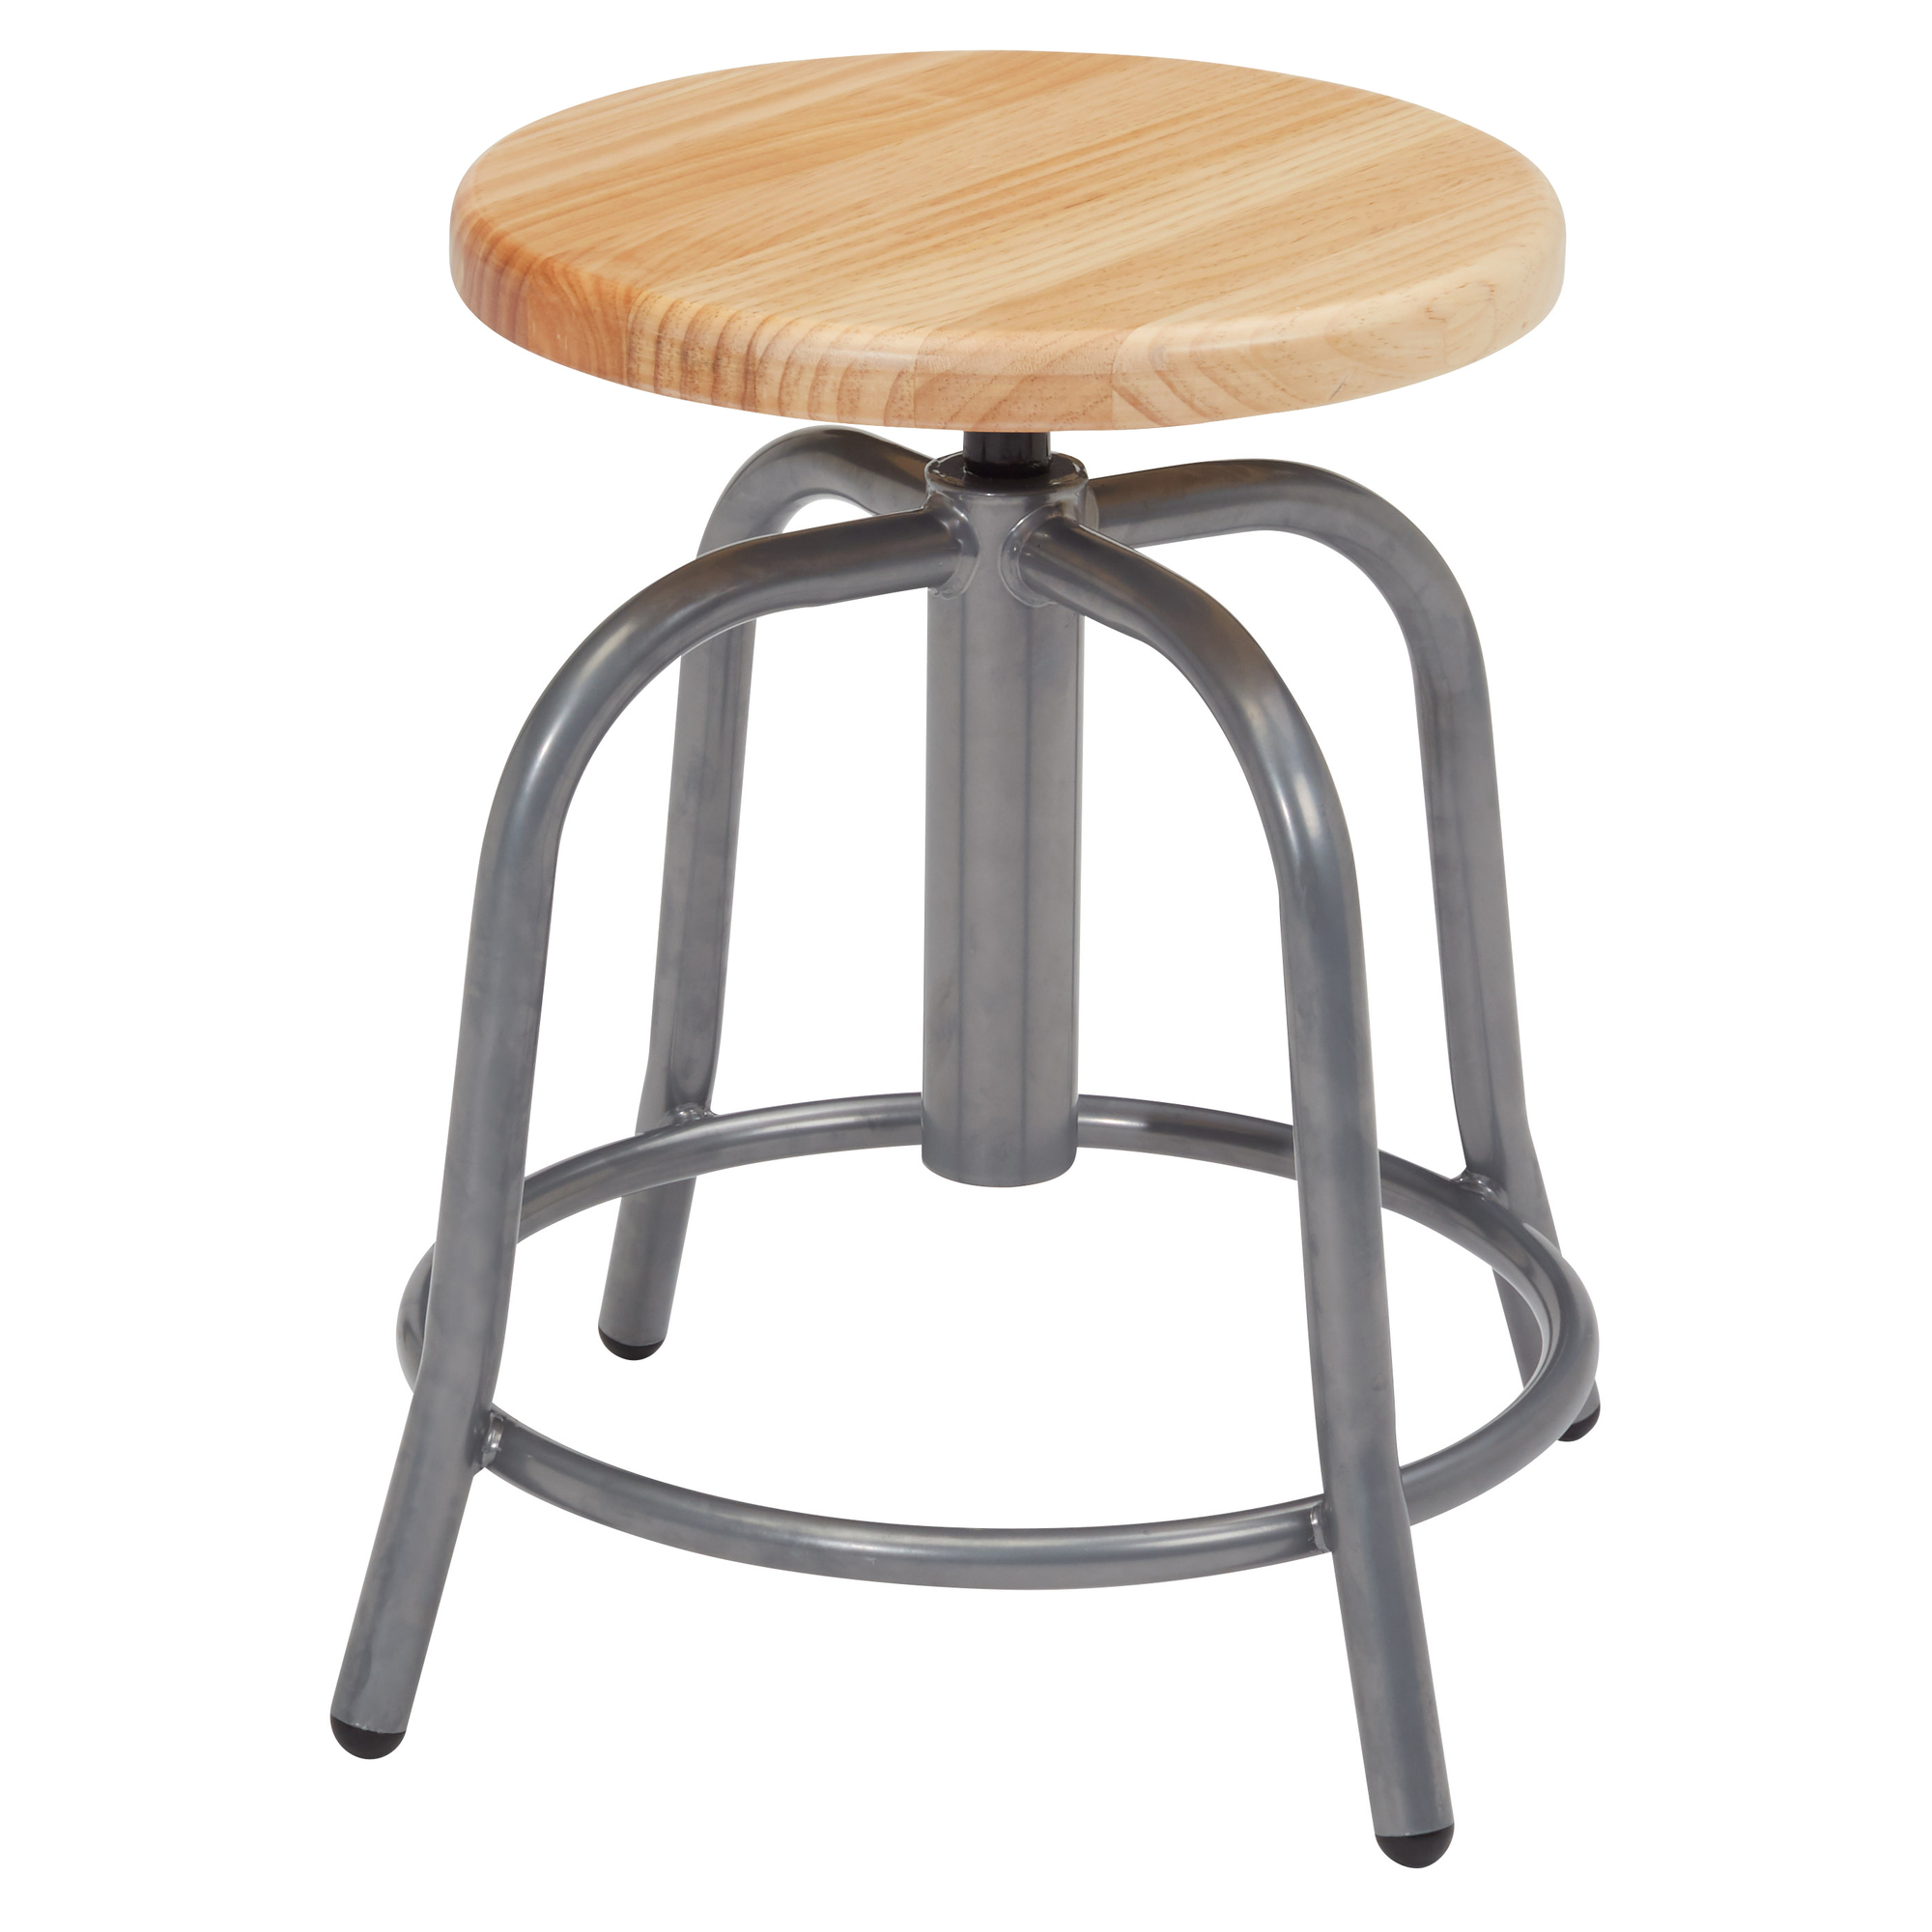 National Public Seating, 19â - 25â Height Adjust Swivel Stool, Primary Color Beige, Included (qty.) 1, Seating Type Office Stool, Model 6800W-02